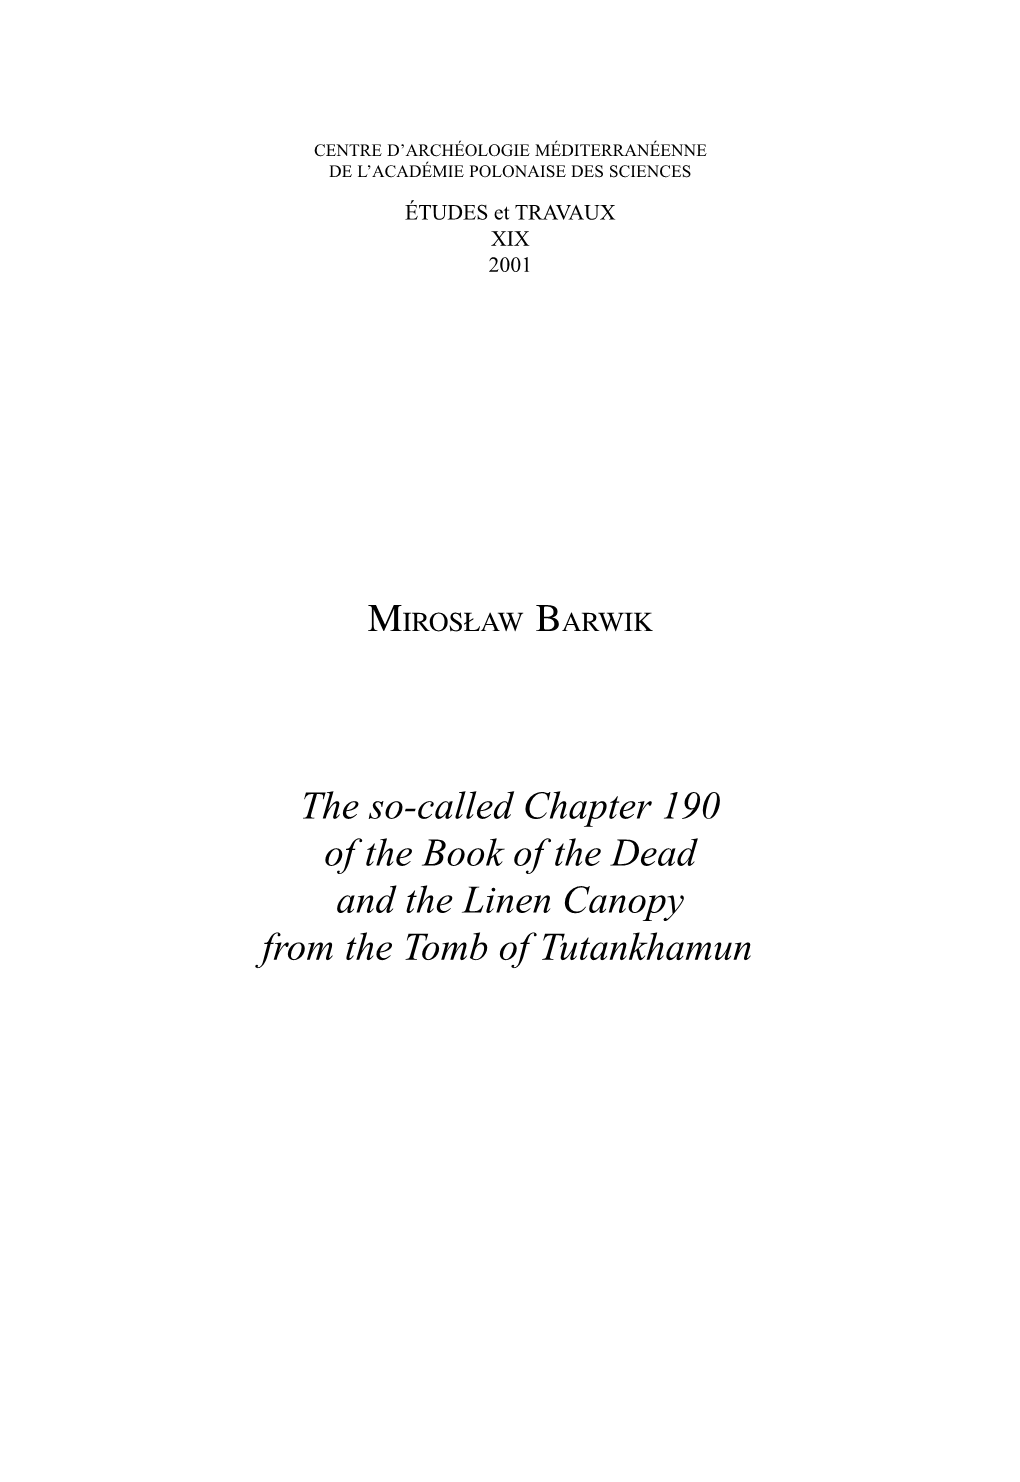 The So-Called Chapter 190 of the Book of the Dead and the Linen Canopy from the Tomb of Tutankhamun 28 MIROSŁAW BARWIK